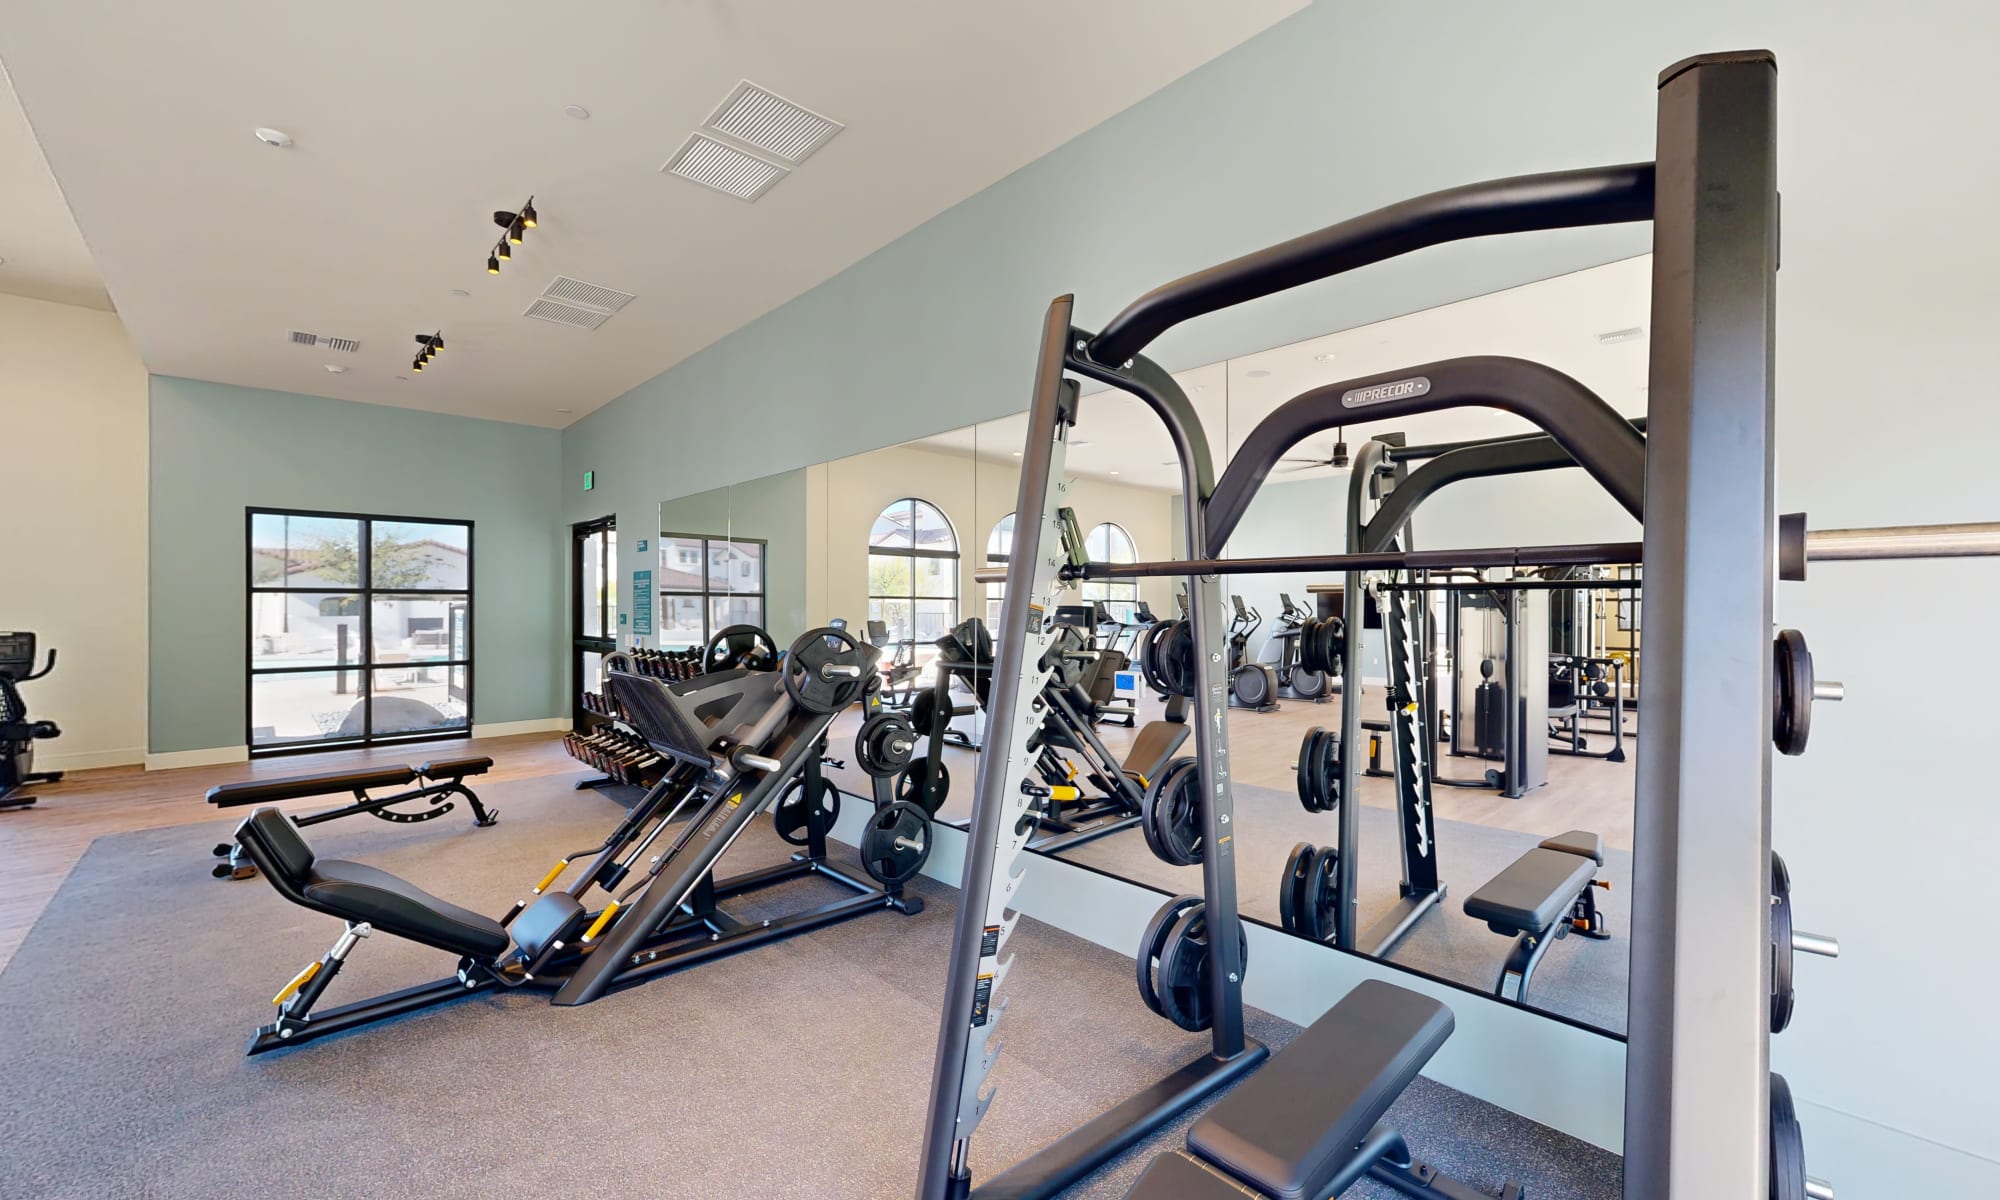 Fitness center with weight lifting equipment at The Villas at Anacapa Canyon in Camarillo, California